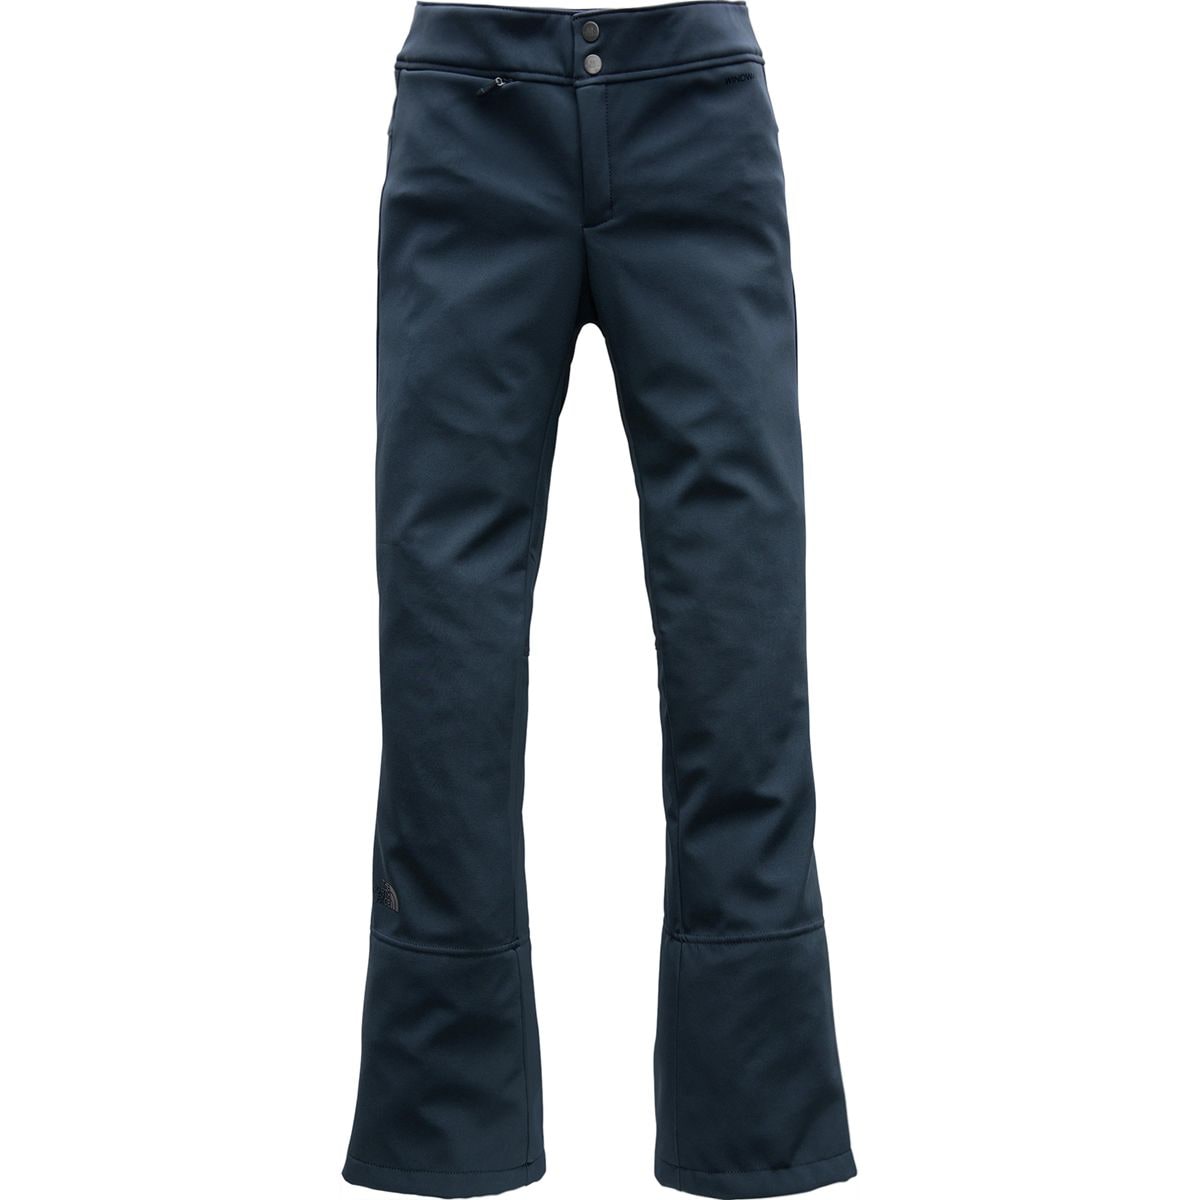 THE NORTH FACE Apex STH Pants Windwall Pants Women's Large Navy Blue